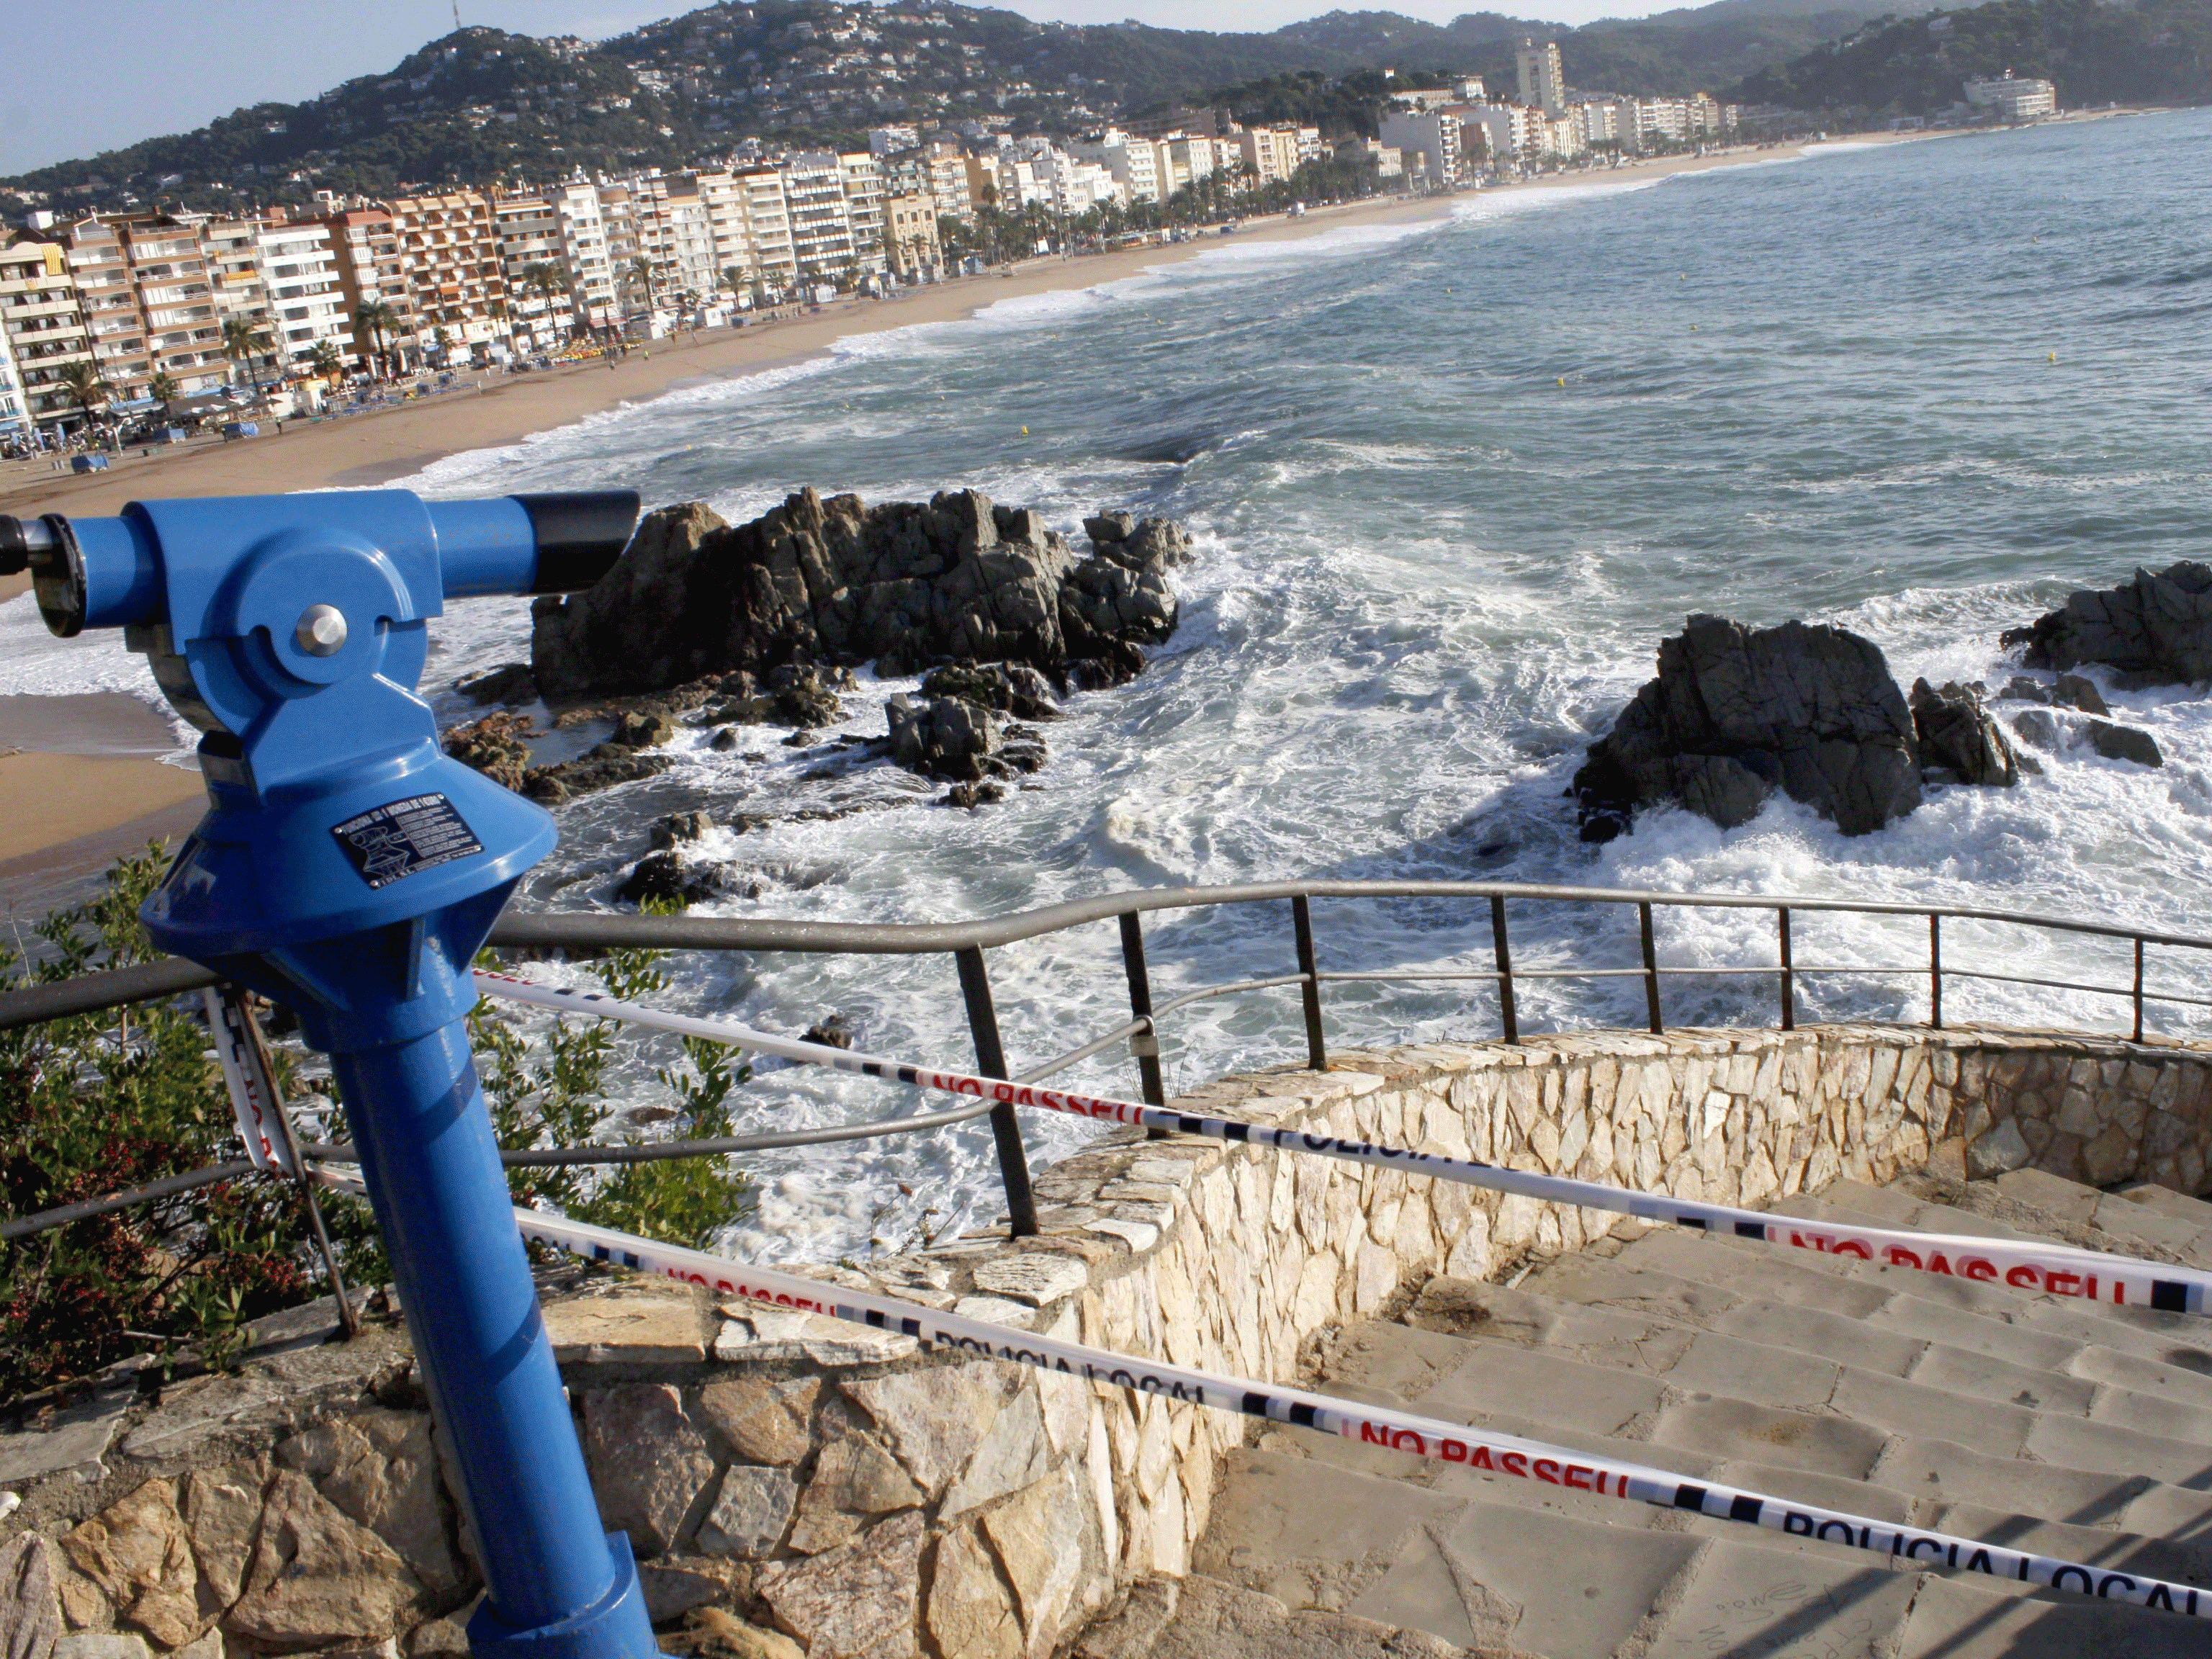 The beach of Lloret de Mar where the bodies were found today